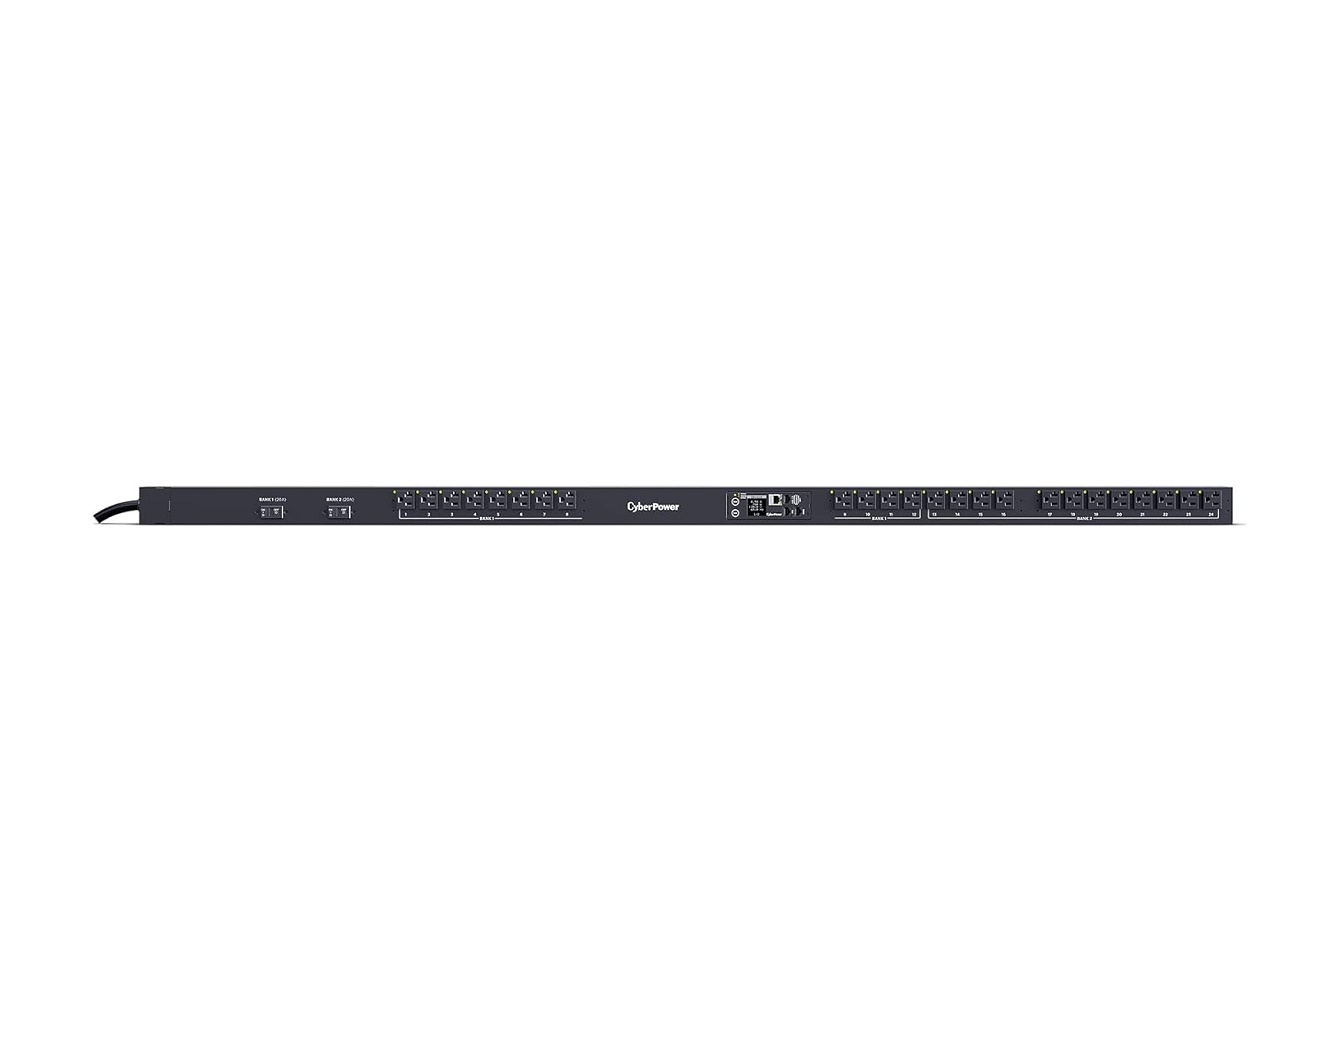 Cyberpower Switched PDU 120V 30A 24-out 0U Rackmount PDU41102